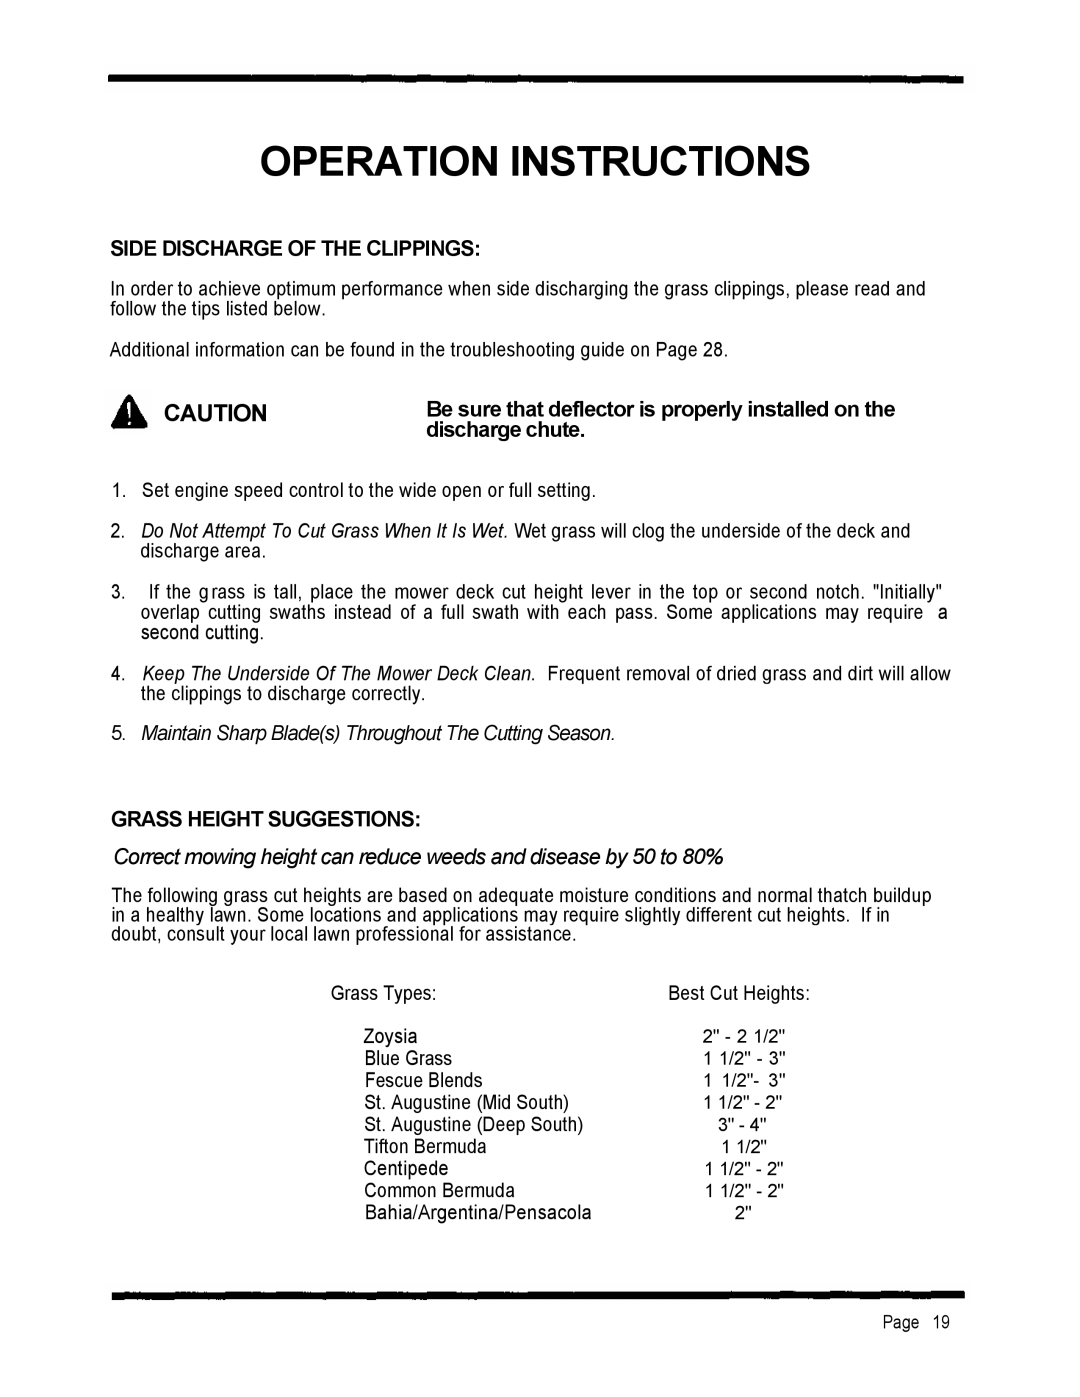 Dixon 2301 manual Operation Instructions, discharge chute, Side Discharge Of The Clippings, Grass Height Suggestions 